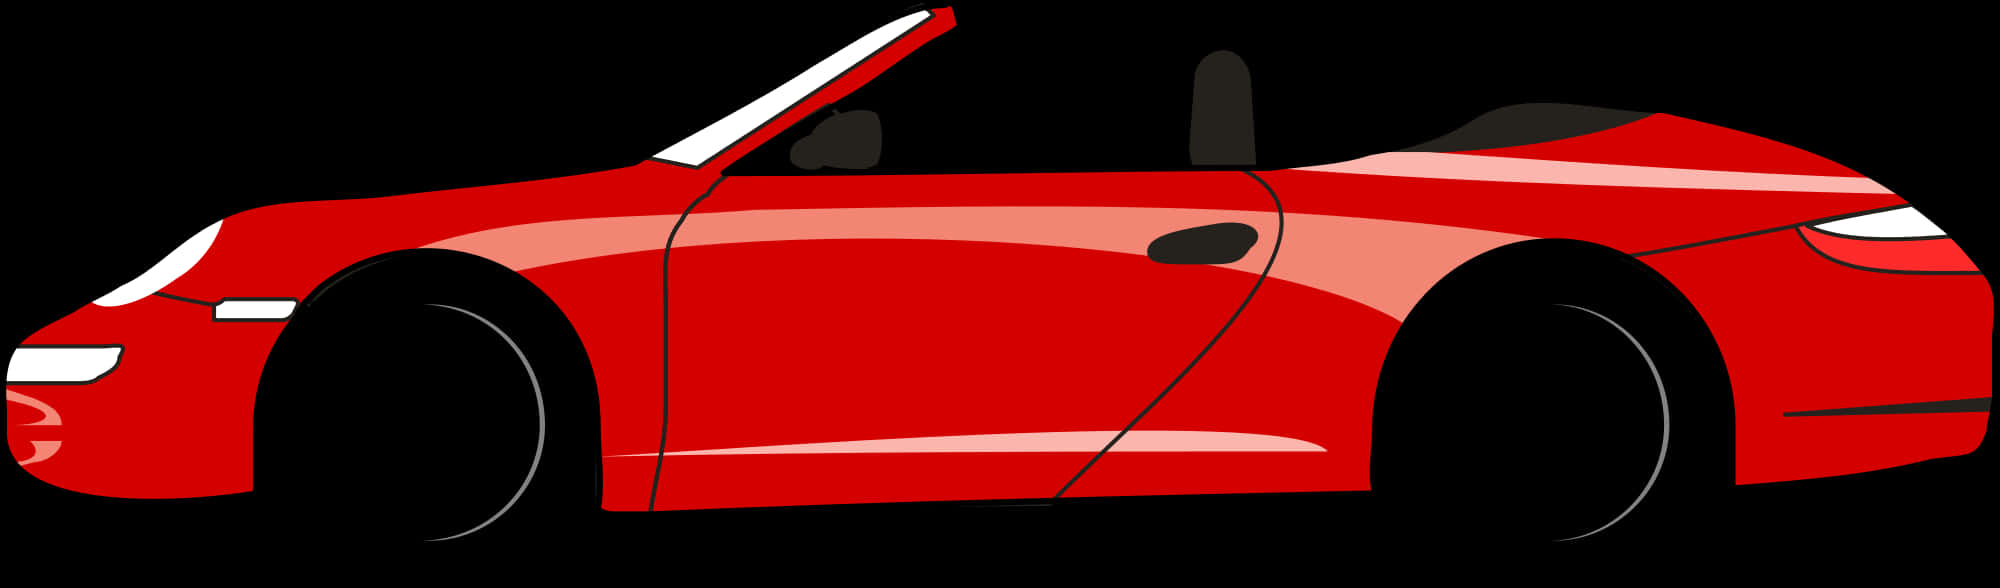 Free Red Sports Car Clipart Clipart And Vector Image - Sports Car Clipart Png, Transparent Png